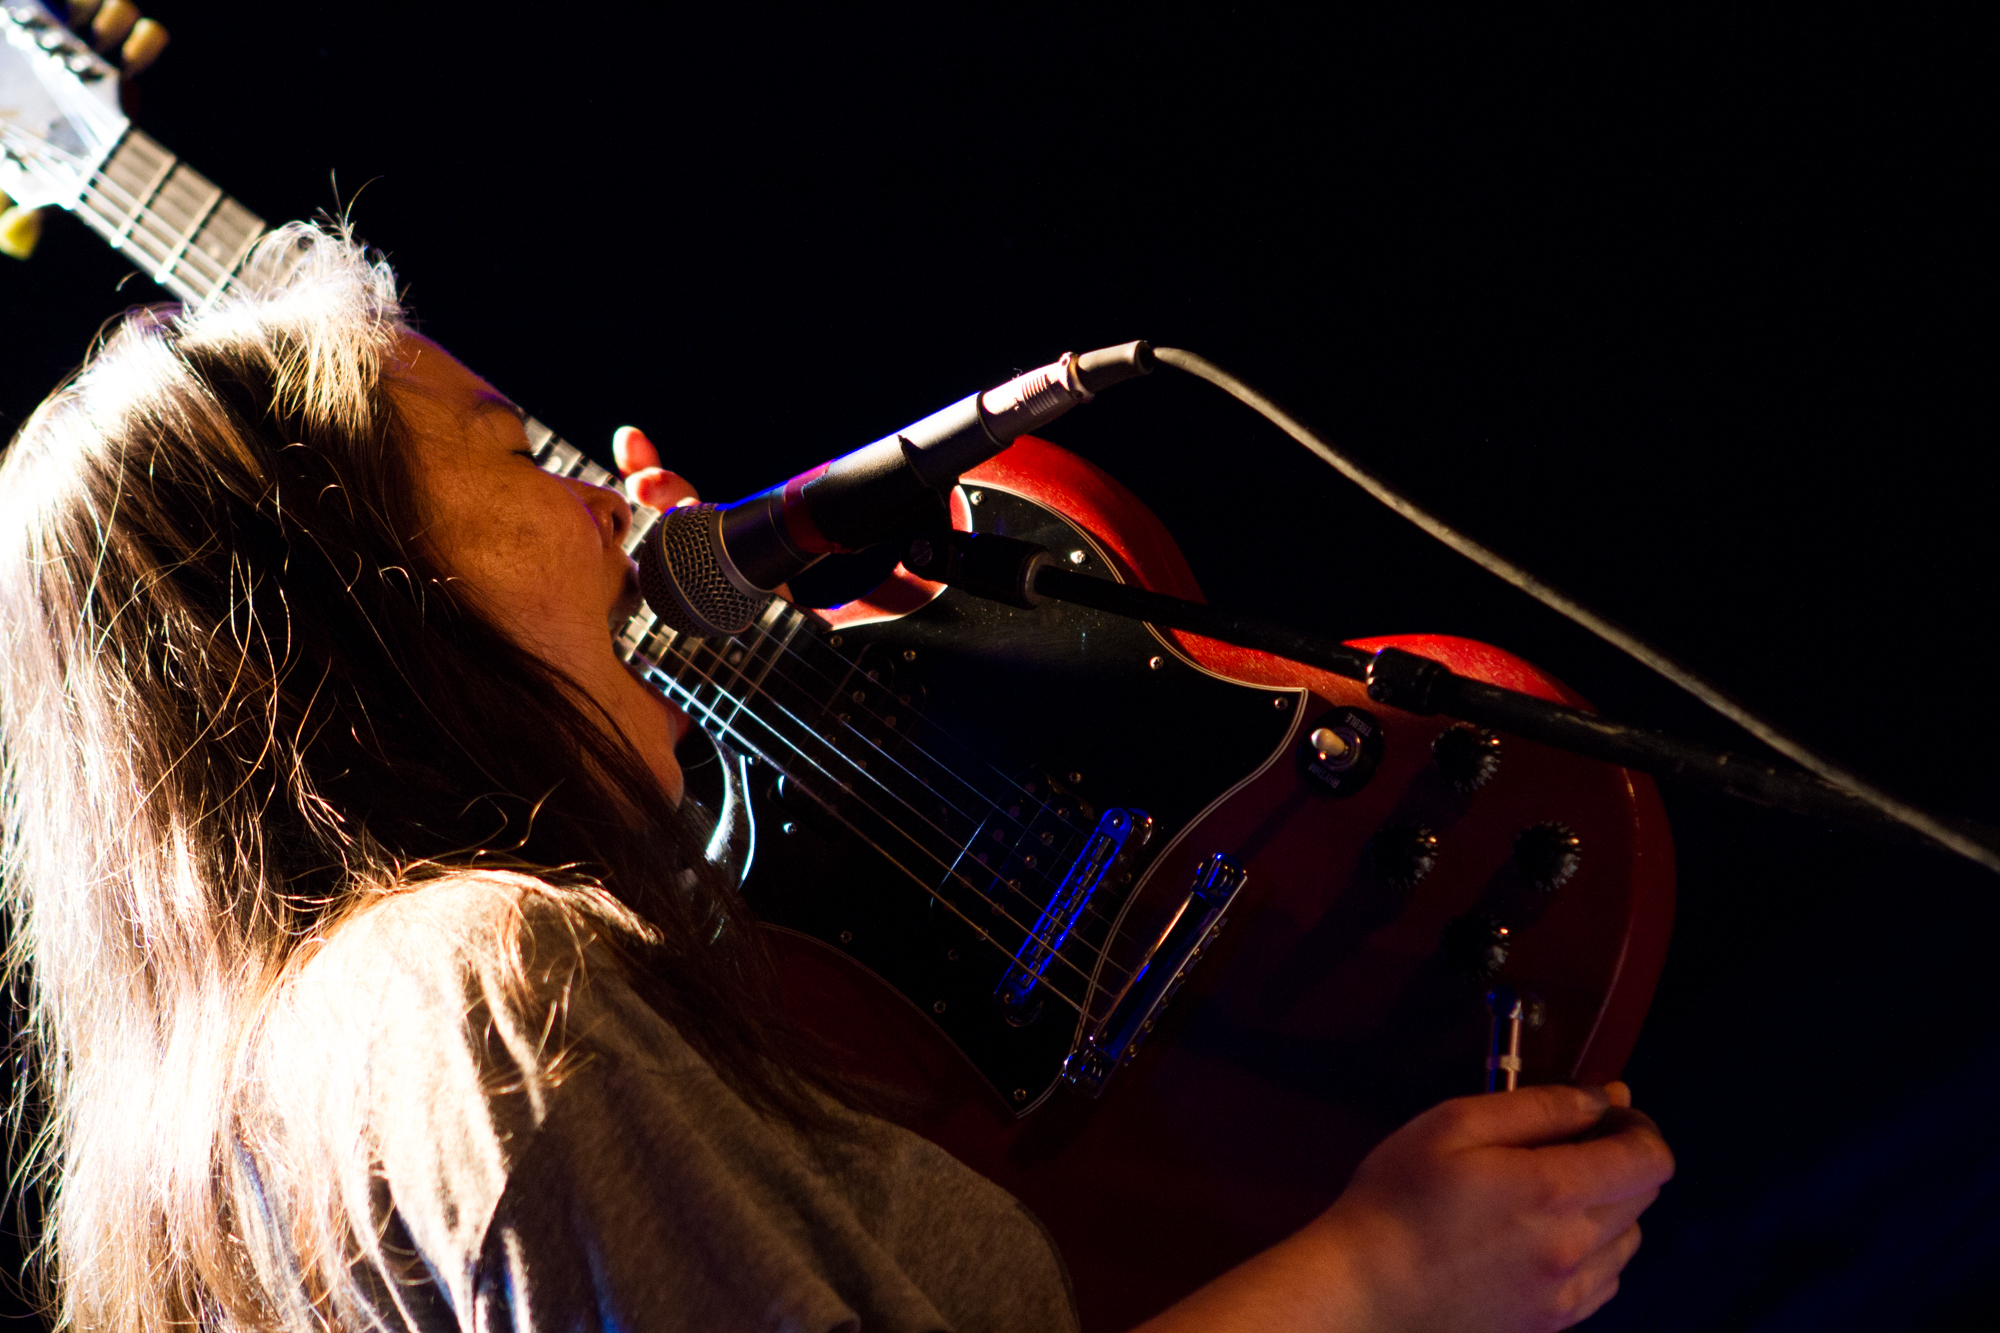 Mitski plays at Bowery Ballroom, in New York, NY on Apr. 25, 2015. (© Michael Katzif - Do not use or republish without prior consent.)